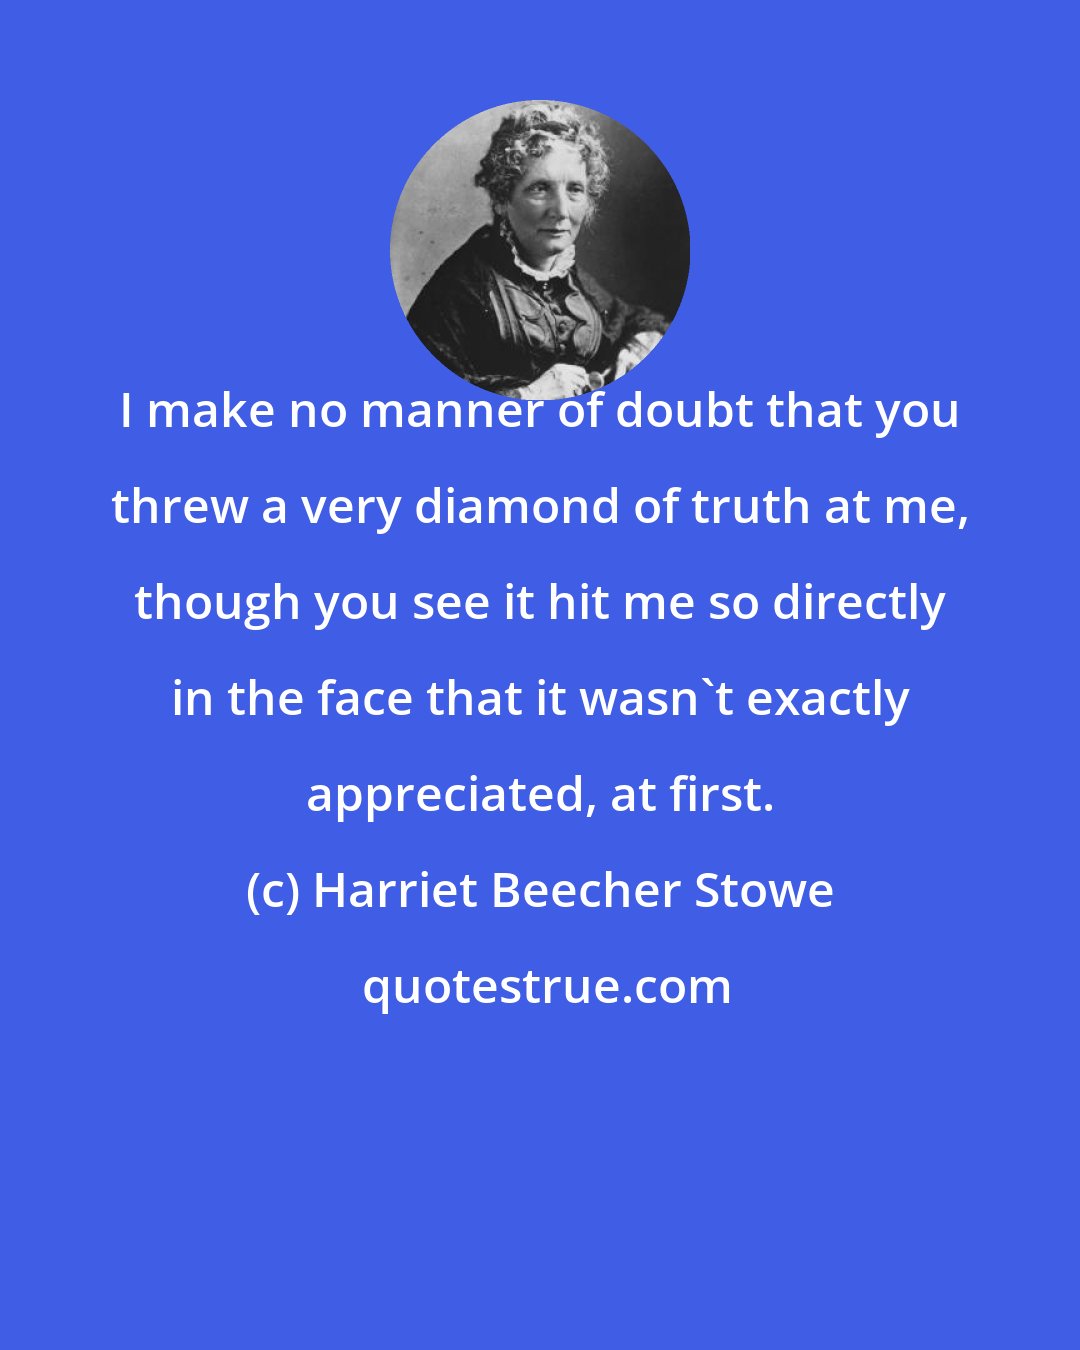 Harriet Beecher Stowe: I make no manner of doubt that you threw a very diamond of truth at me, though you see it hit me so directly in the face that it wasn't exactly appreciated, at first.